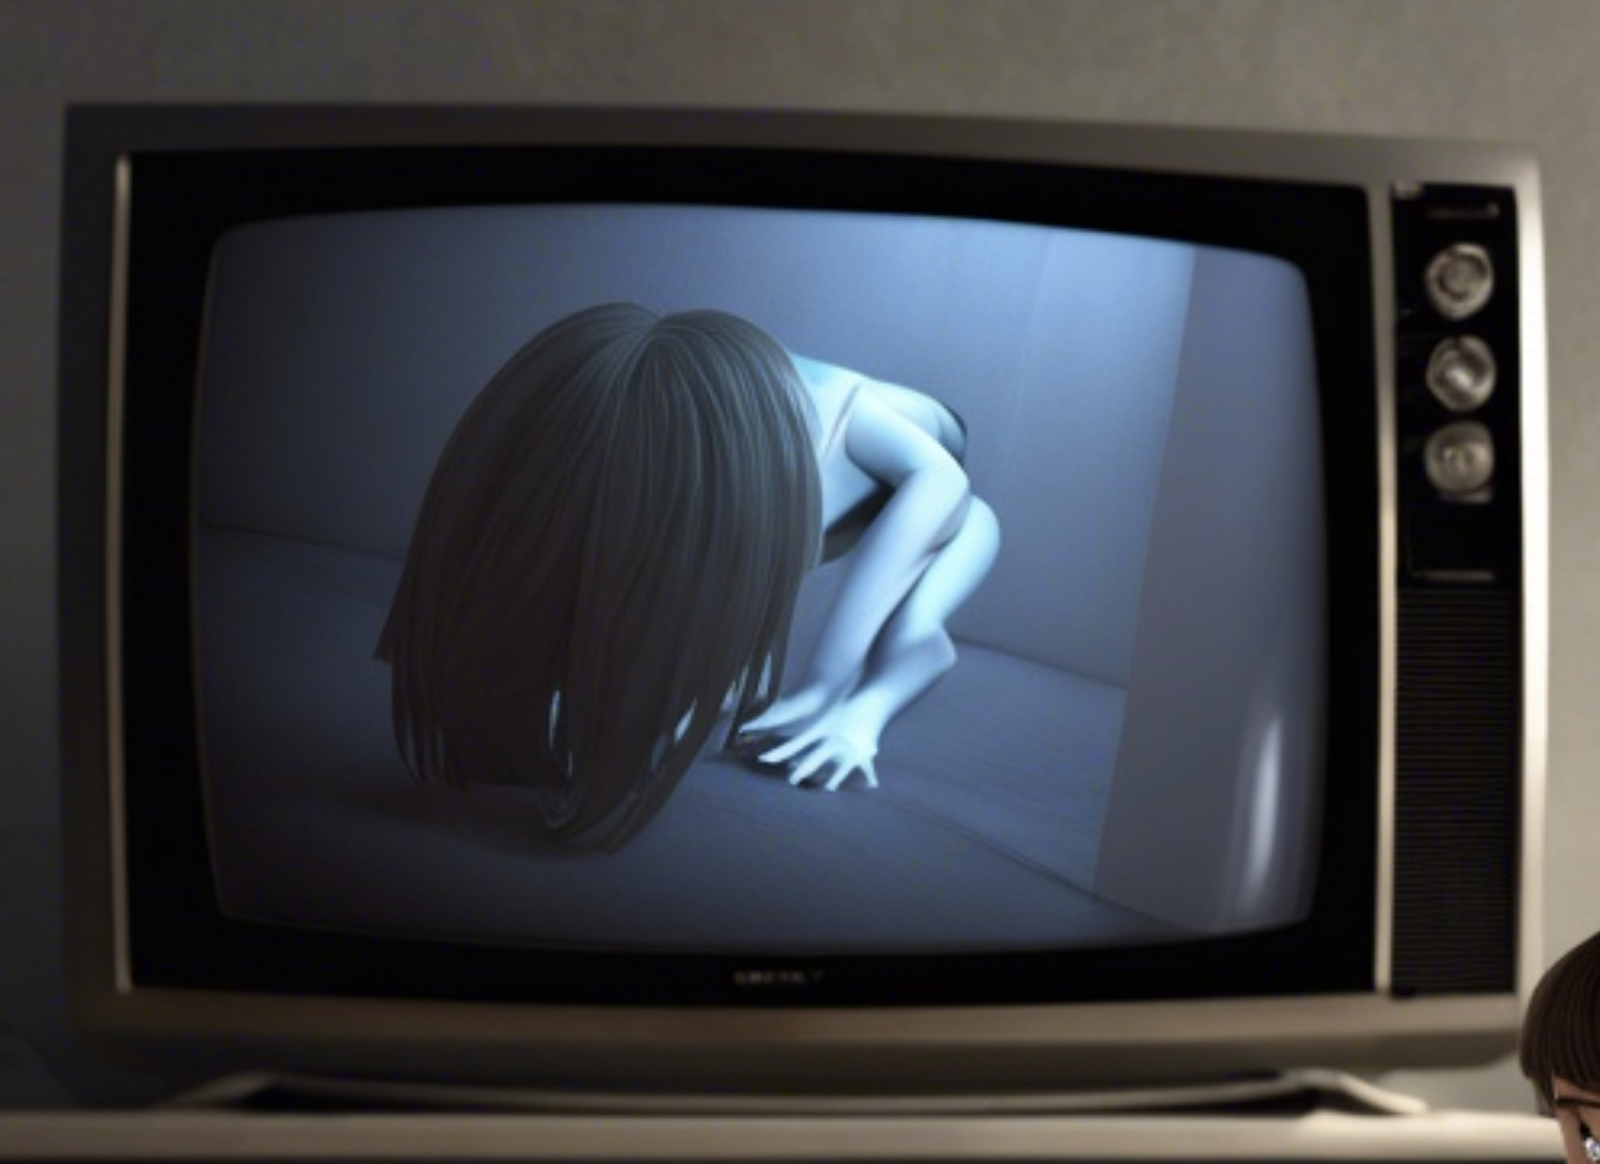 A television screen showing a scene from &quot;The Ring&quot; with the character Samara Morgan in her iconic pose